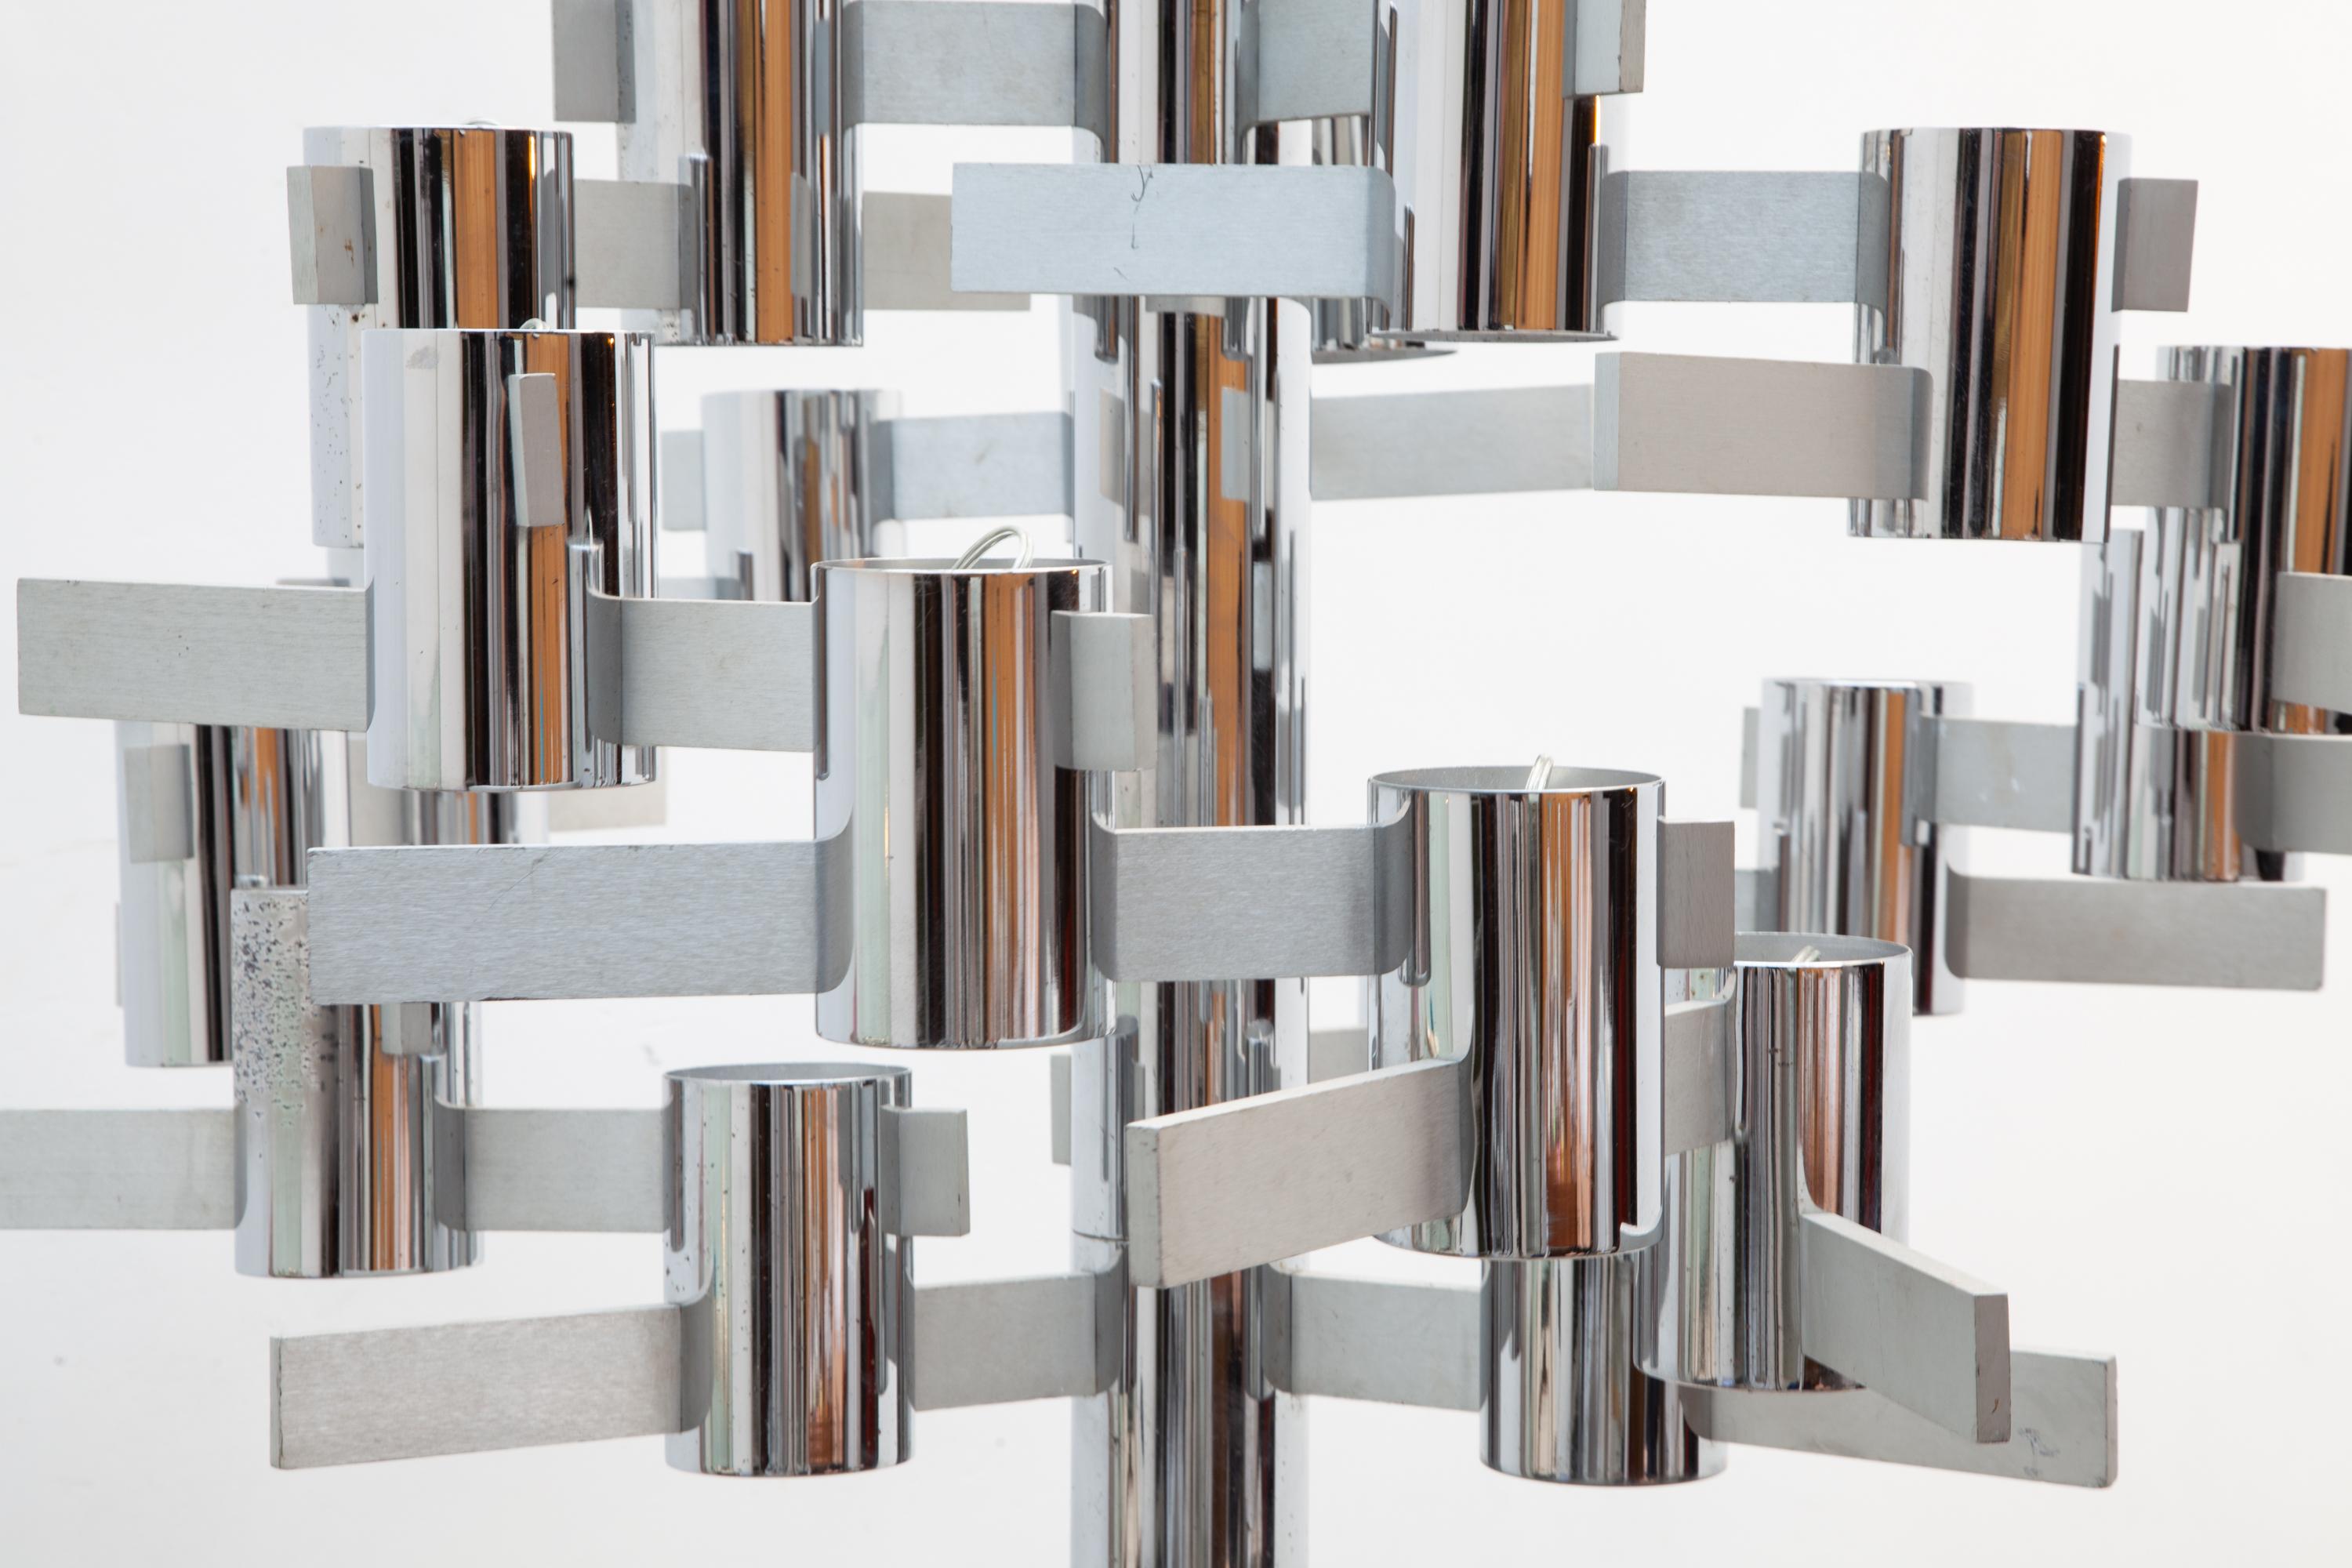 Large rare 1960s chandelier, by Gaetano Sciolari, Italy. Made of brushed chrome and aluminum a series of twenty-two individual lights on geometric steel arms arranged in a spiral formation.This impressive chandelier will make a powerful modernist